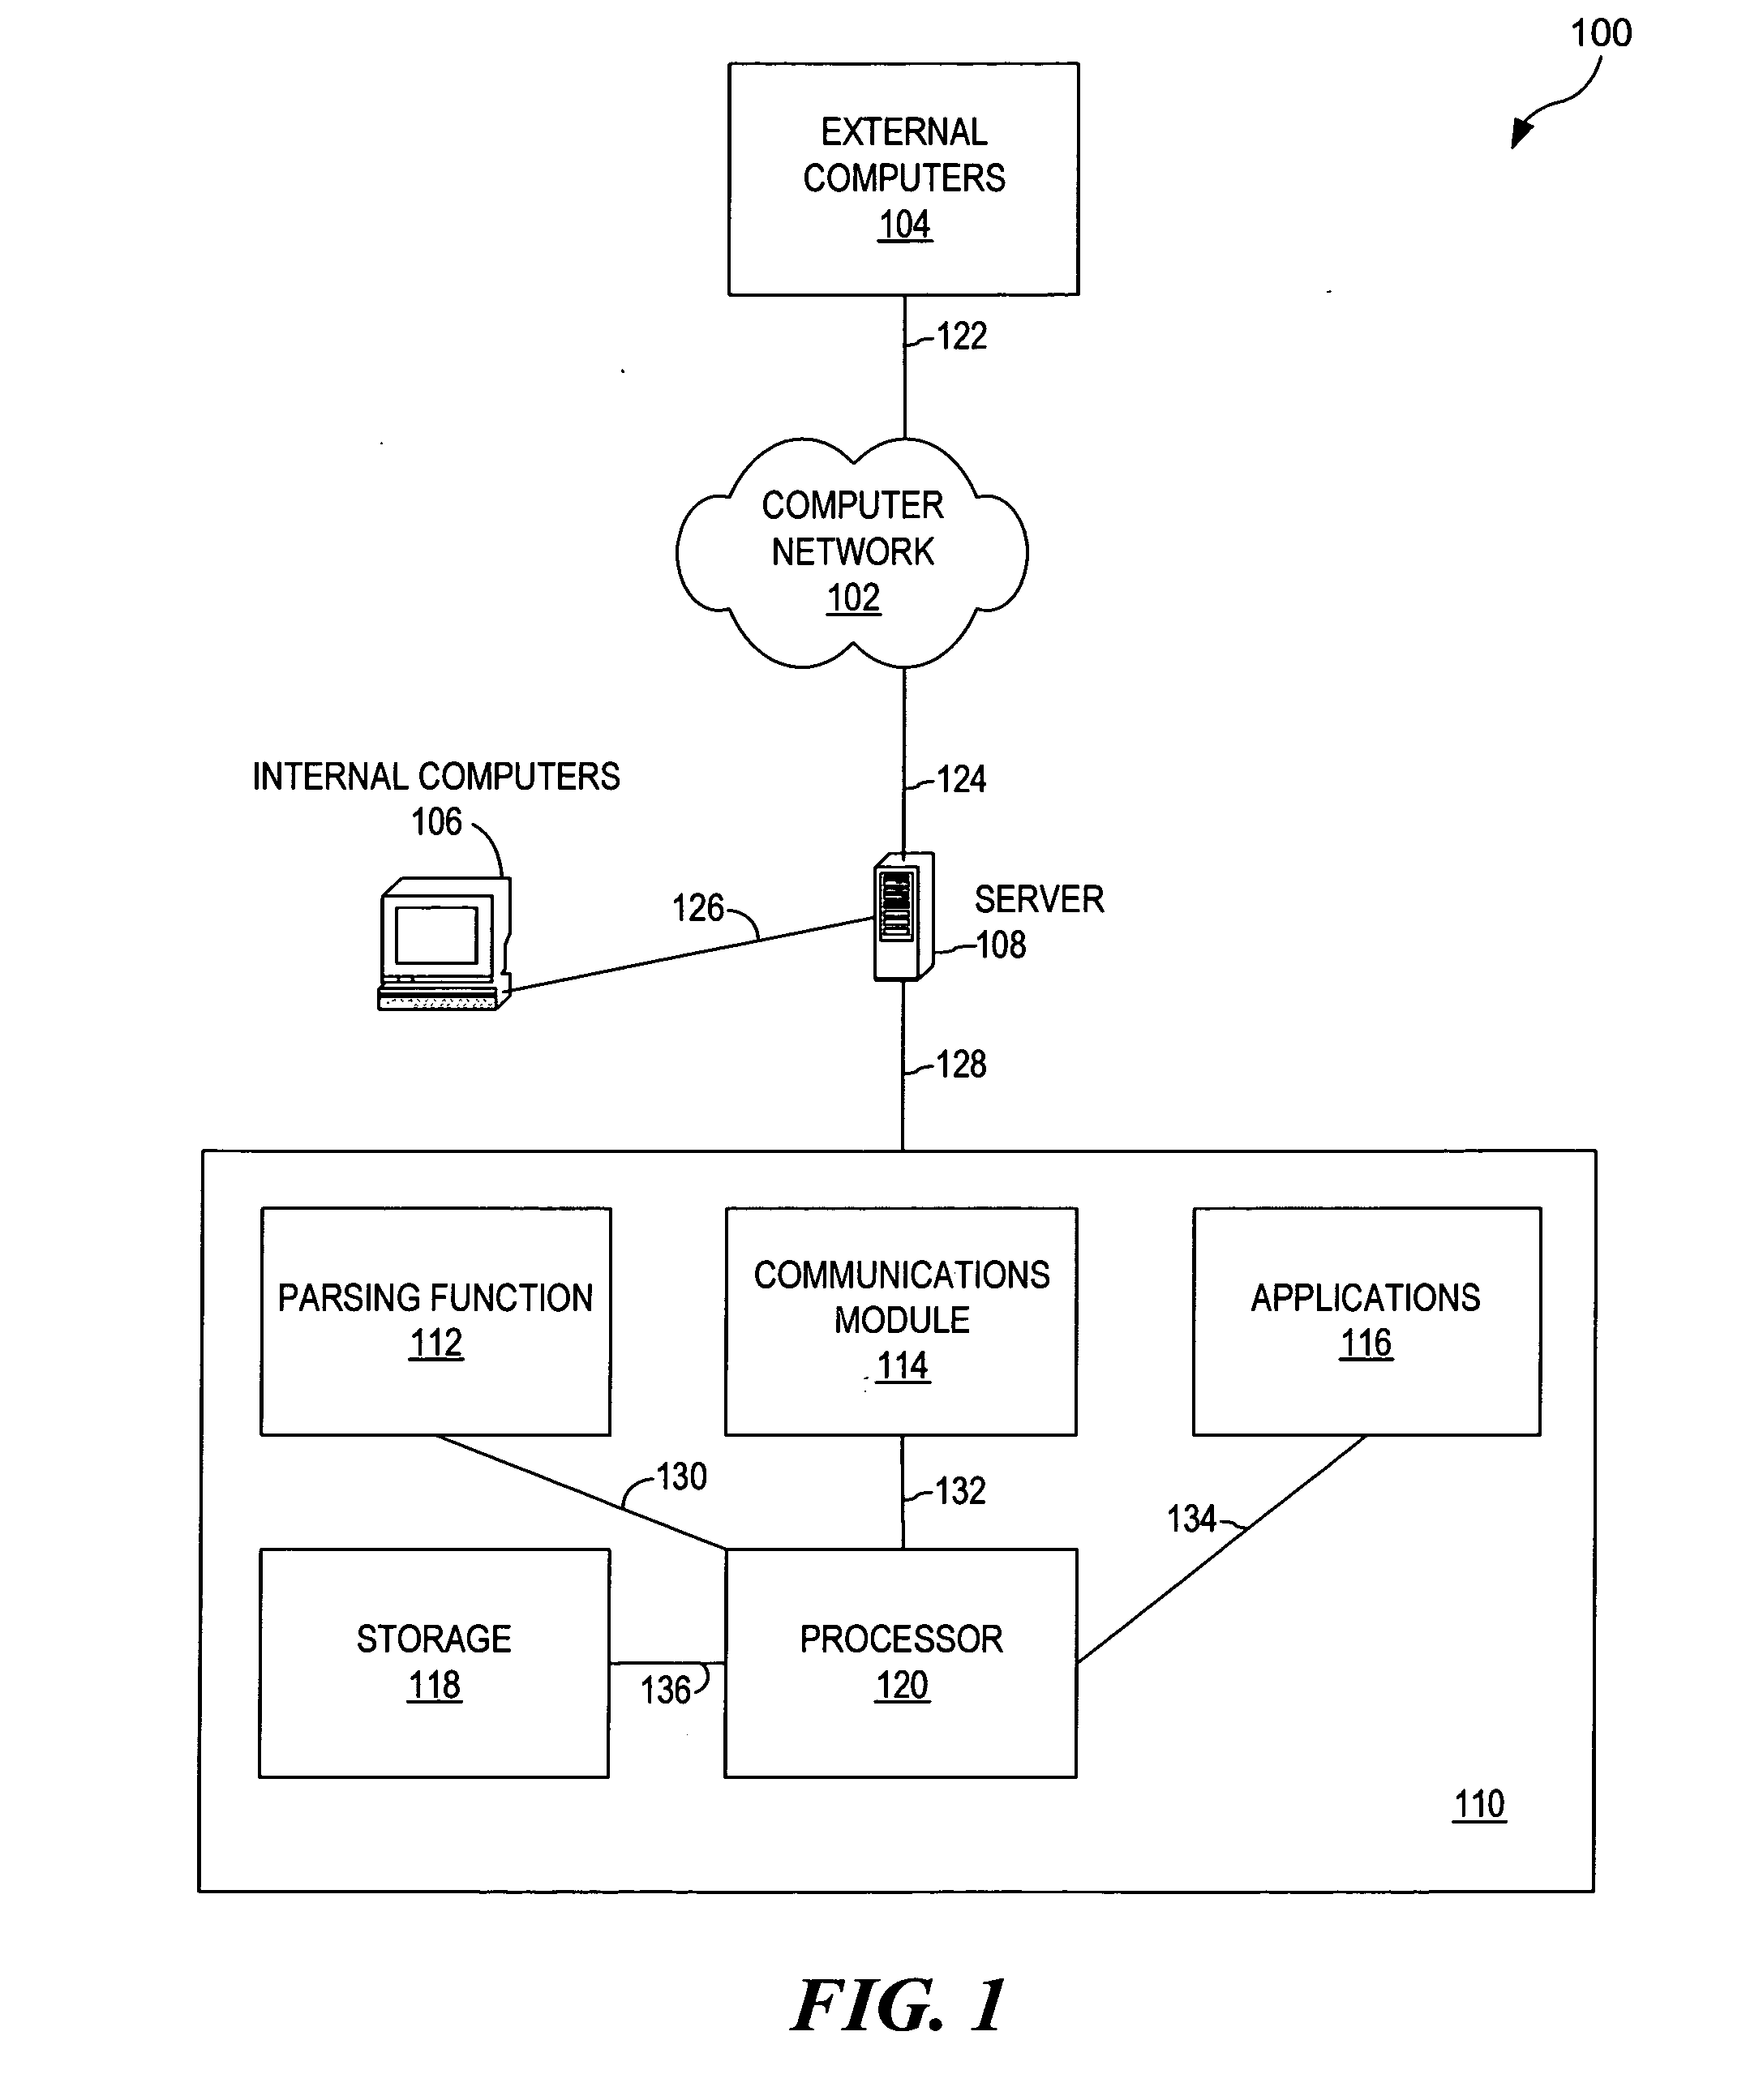 Method and system for monitoring personal computer documents for sensitive data